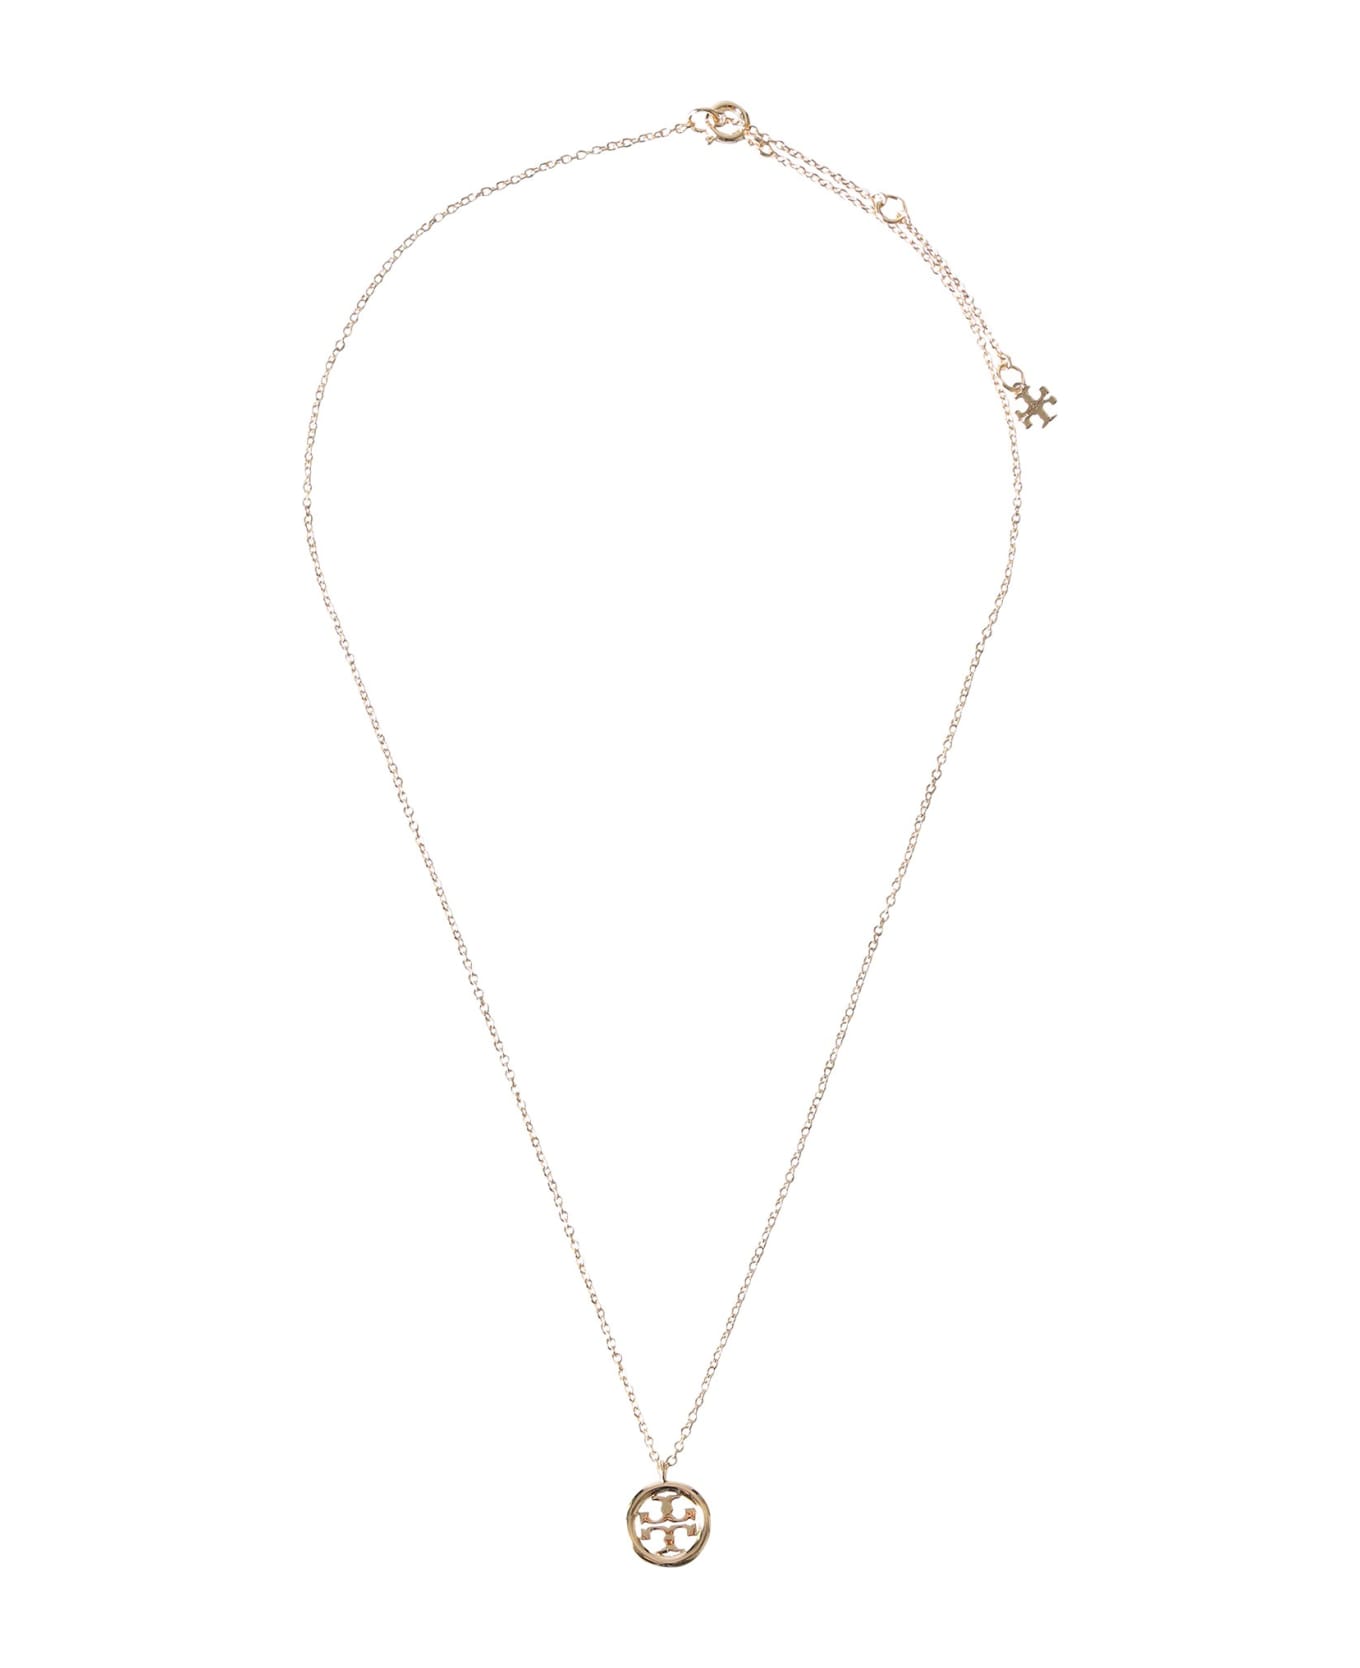 Tory Burch Miller Necklace - ORO ネックレス